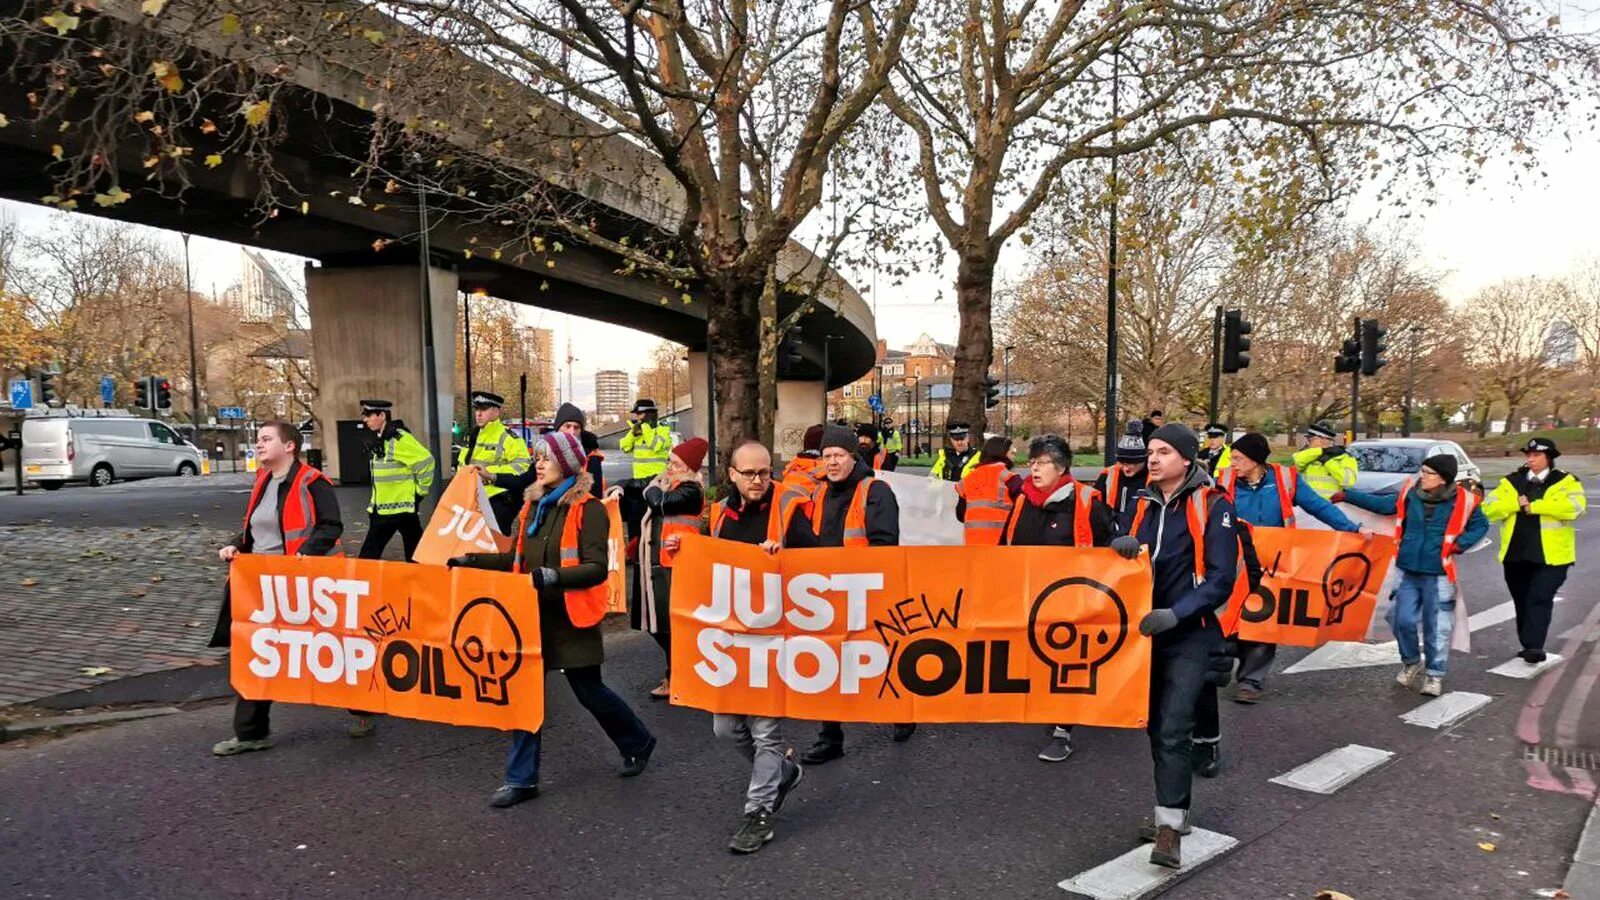 Public order. Just stop Oil. Just stop Oil активисты. Roundabouts in London.